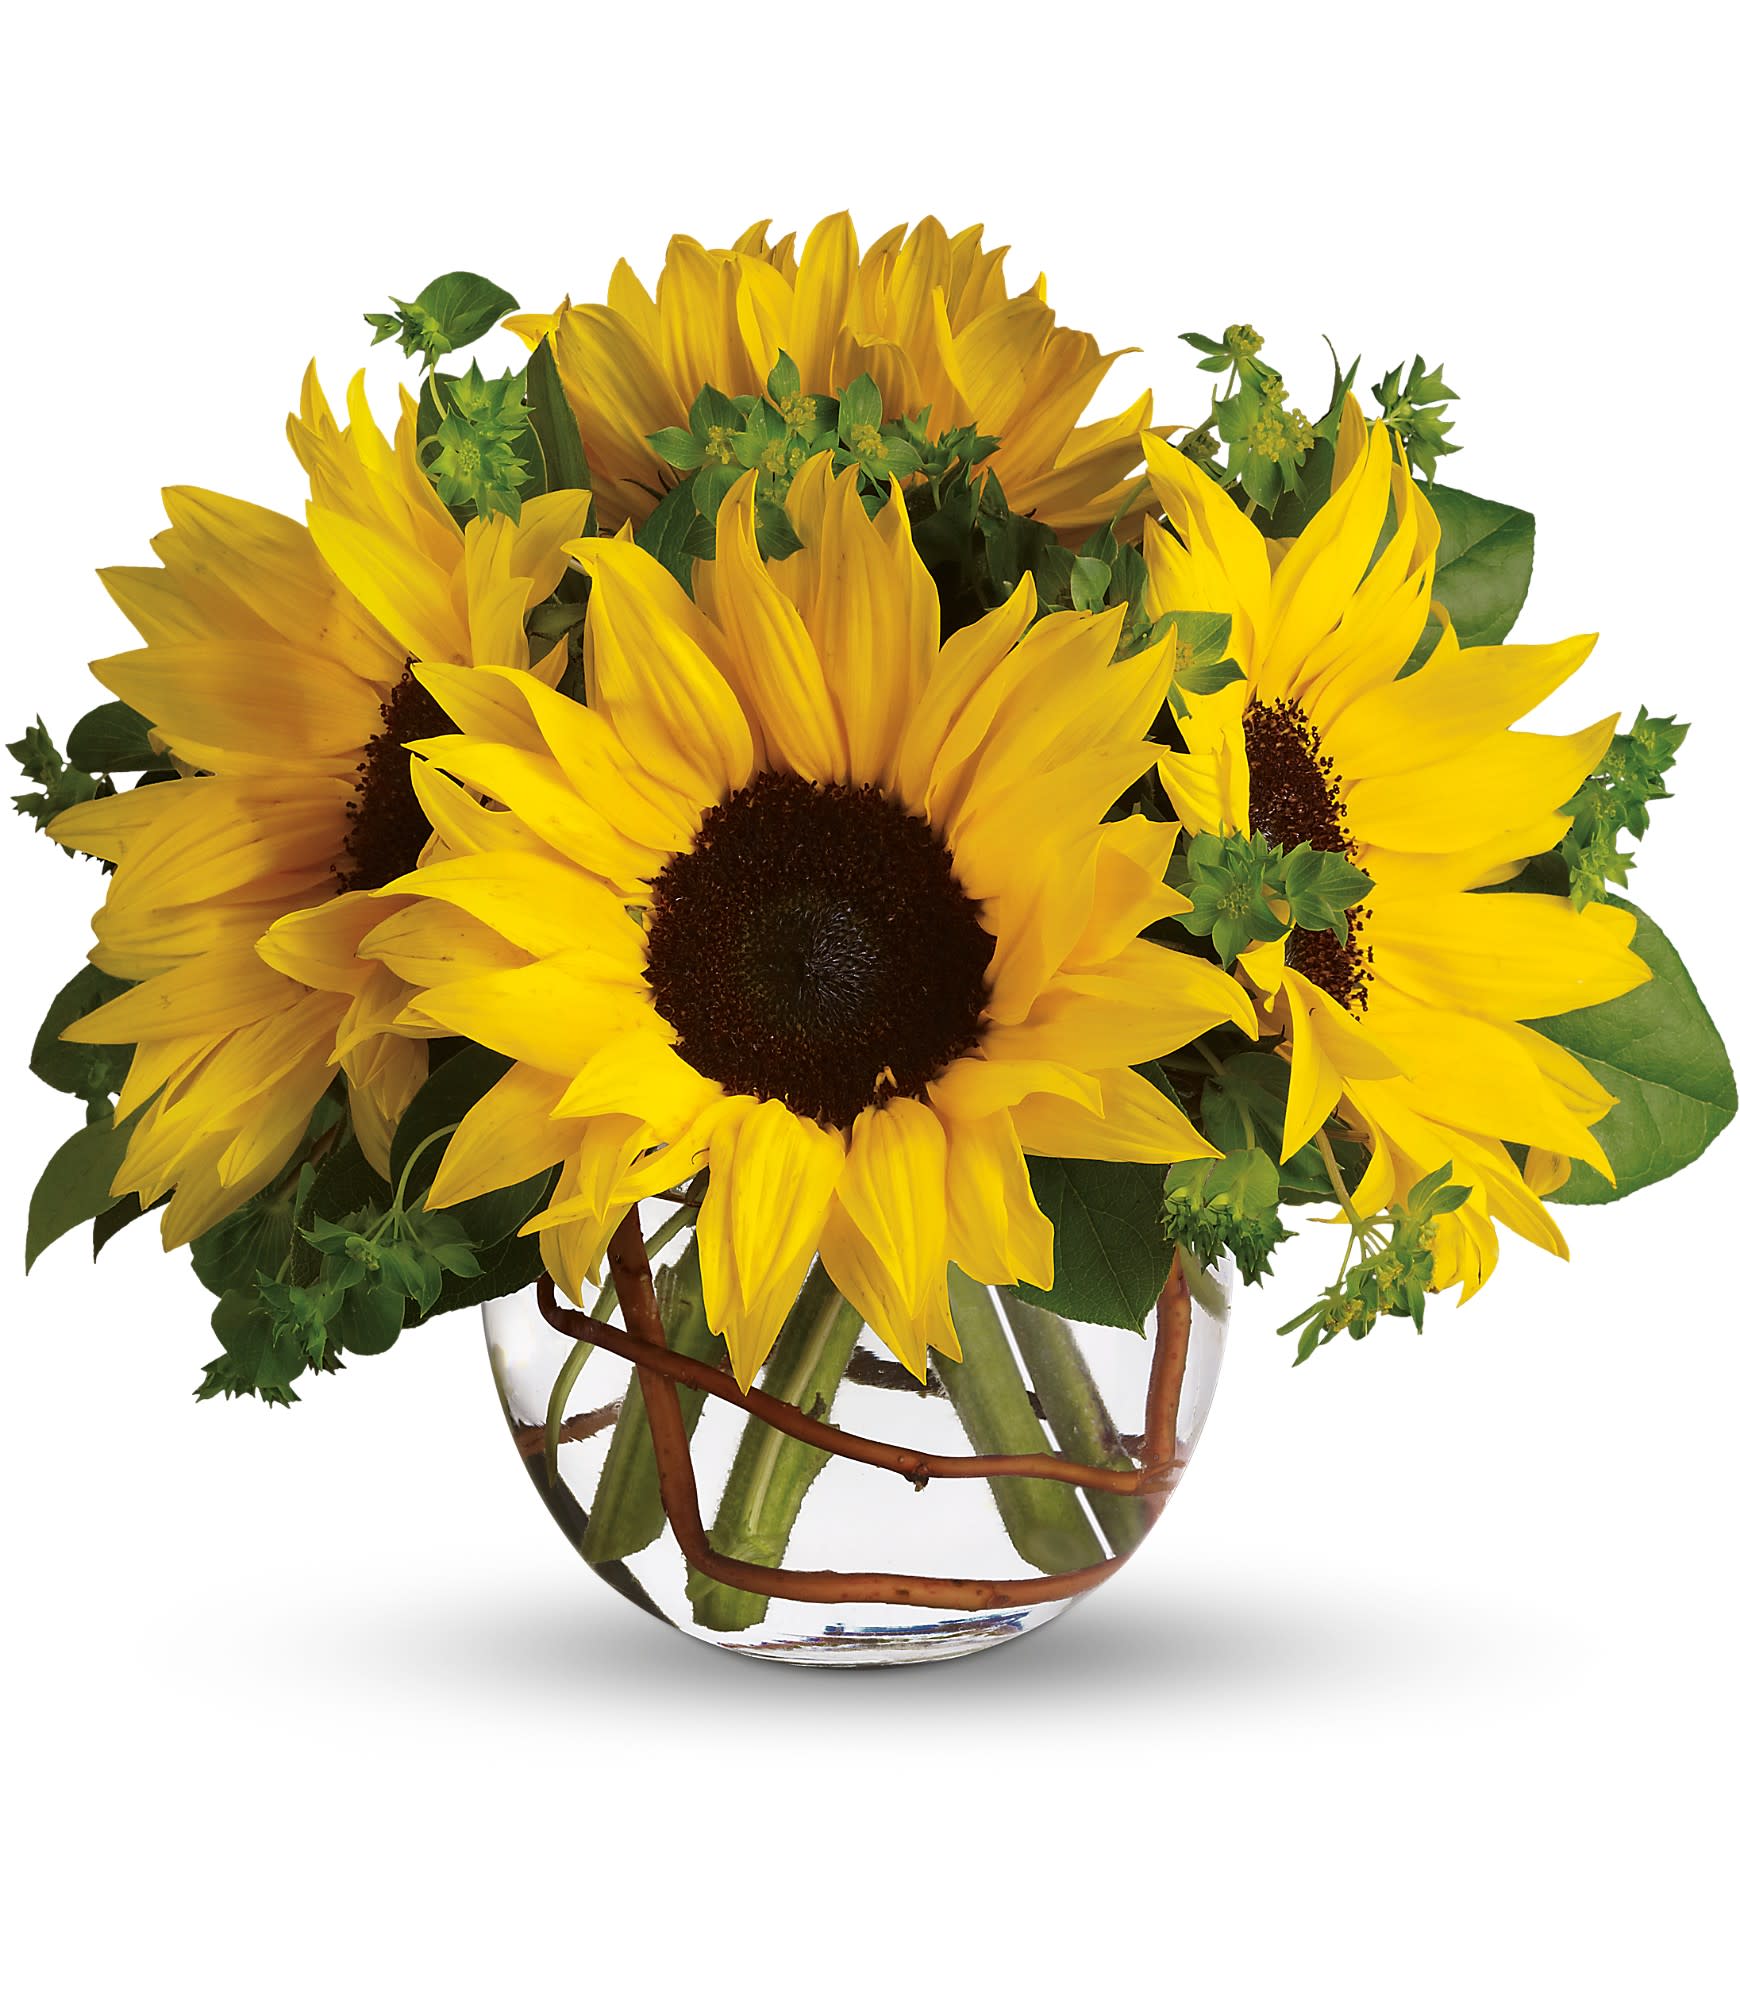 Sunny Sunflower Bouquet - Whoever receives this stunning bouquet is sure to be bowled over by its bold beauty! It's big on fun and big on flowers. 